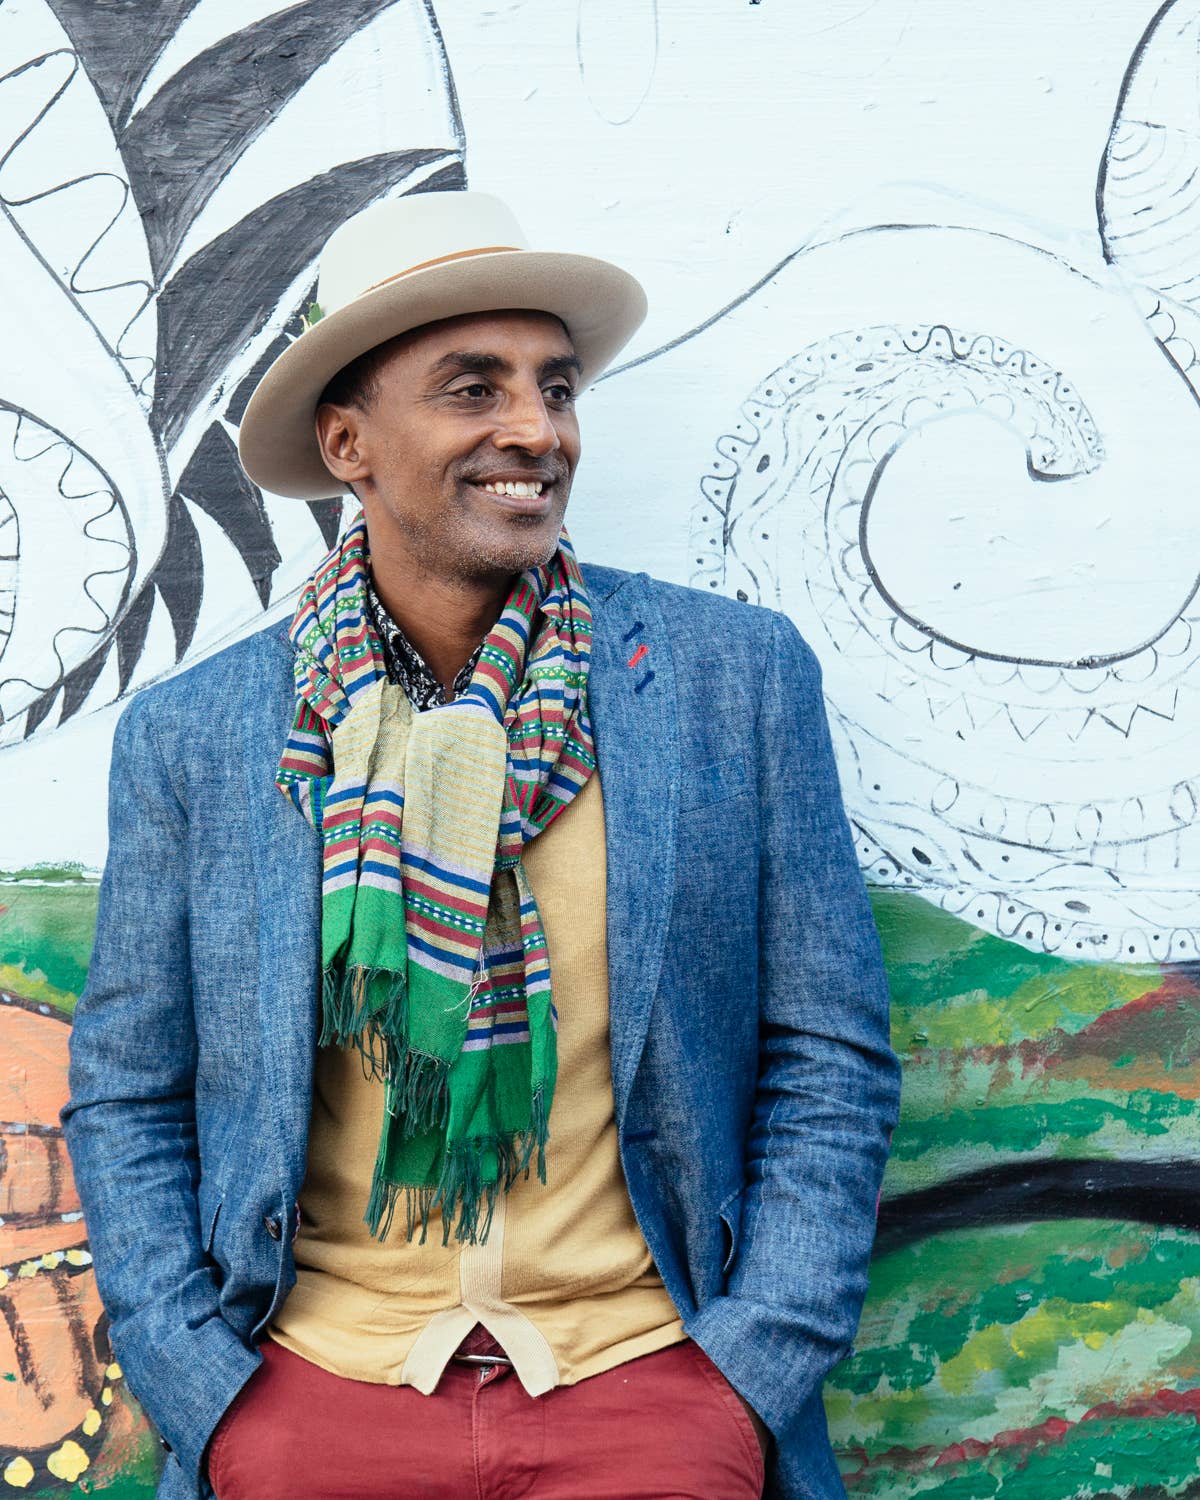 Marcus Samuelsson Dishes on How to Eat Harlem